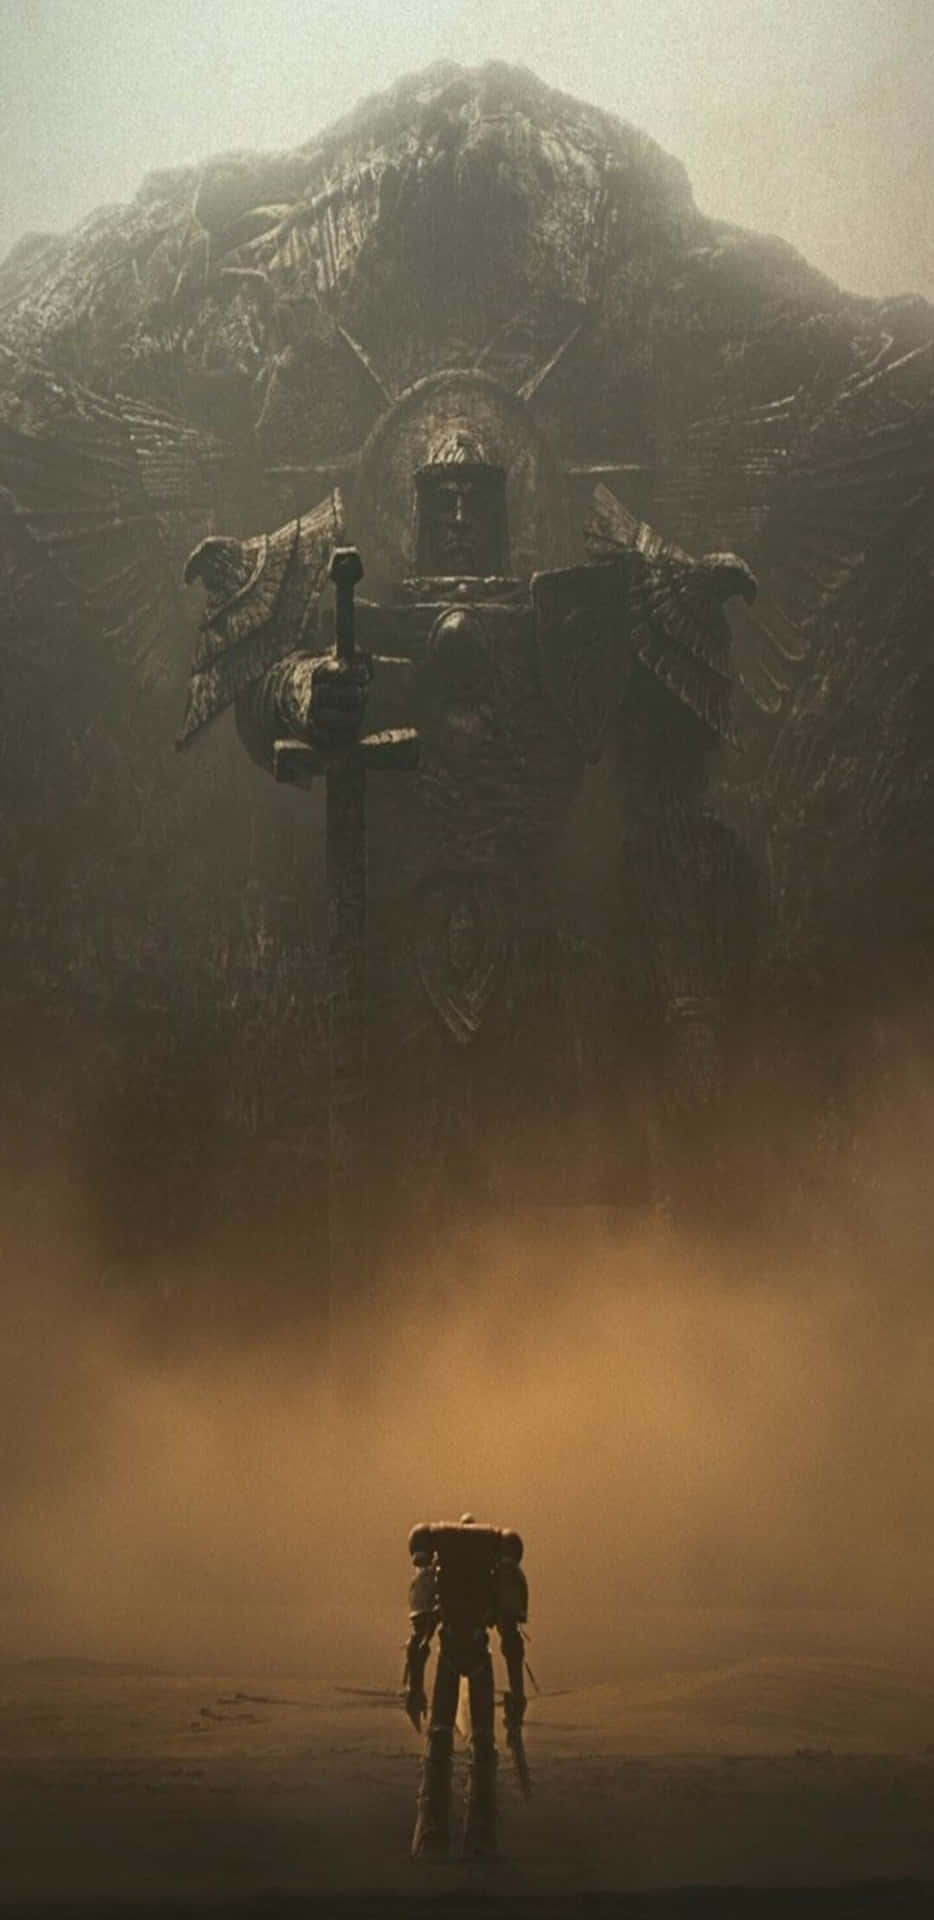 A Giant Robot Standing In Front Of A Mountain